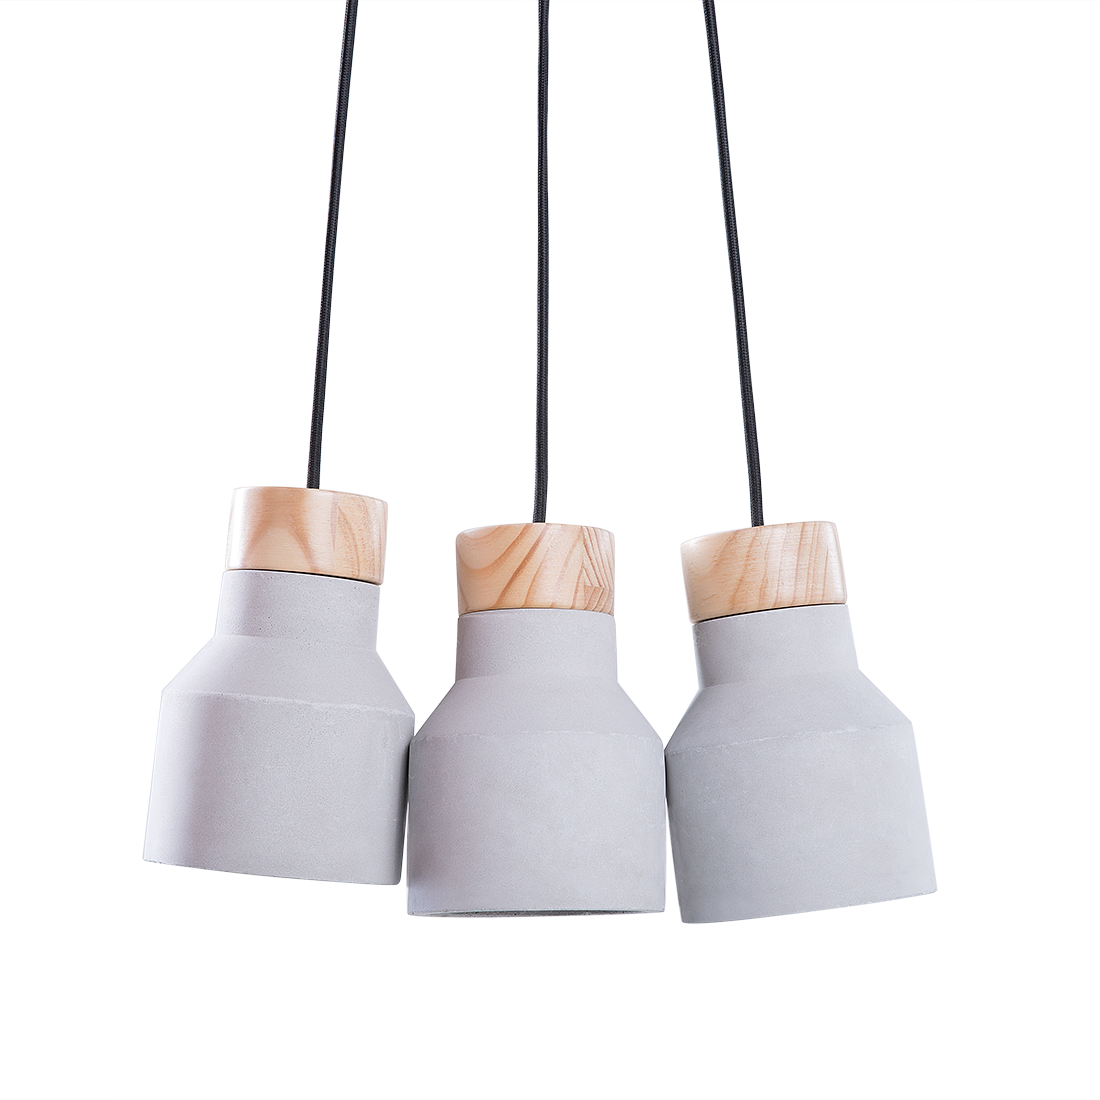 Photos - Chandelier / Lamp Beliani 3 Lights Pendant Cluster Grey Lamp Ceiling Industrial Material:Con 